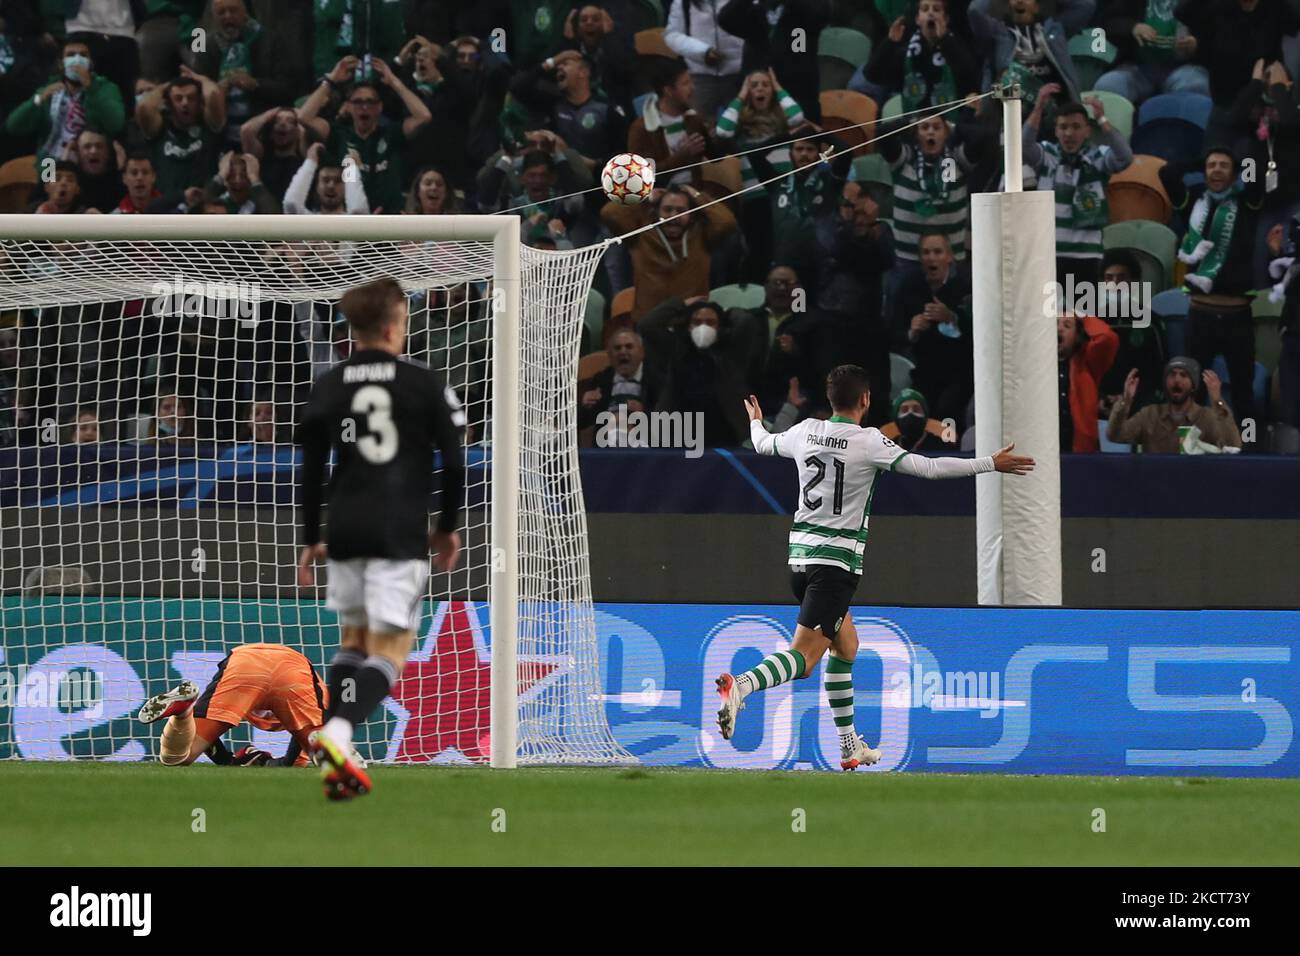 Paulinho of Sporting CP (R ) reacts after missing an opportunity to score during the UEFA Champions League Group C football match between Sporting CP and Besiktas at Alvalade stadium in Lisbon, Portugal, on November 3, 2021. (Photo by Pedro FiÃºza/NurPhoto) Stock Photo